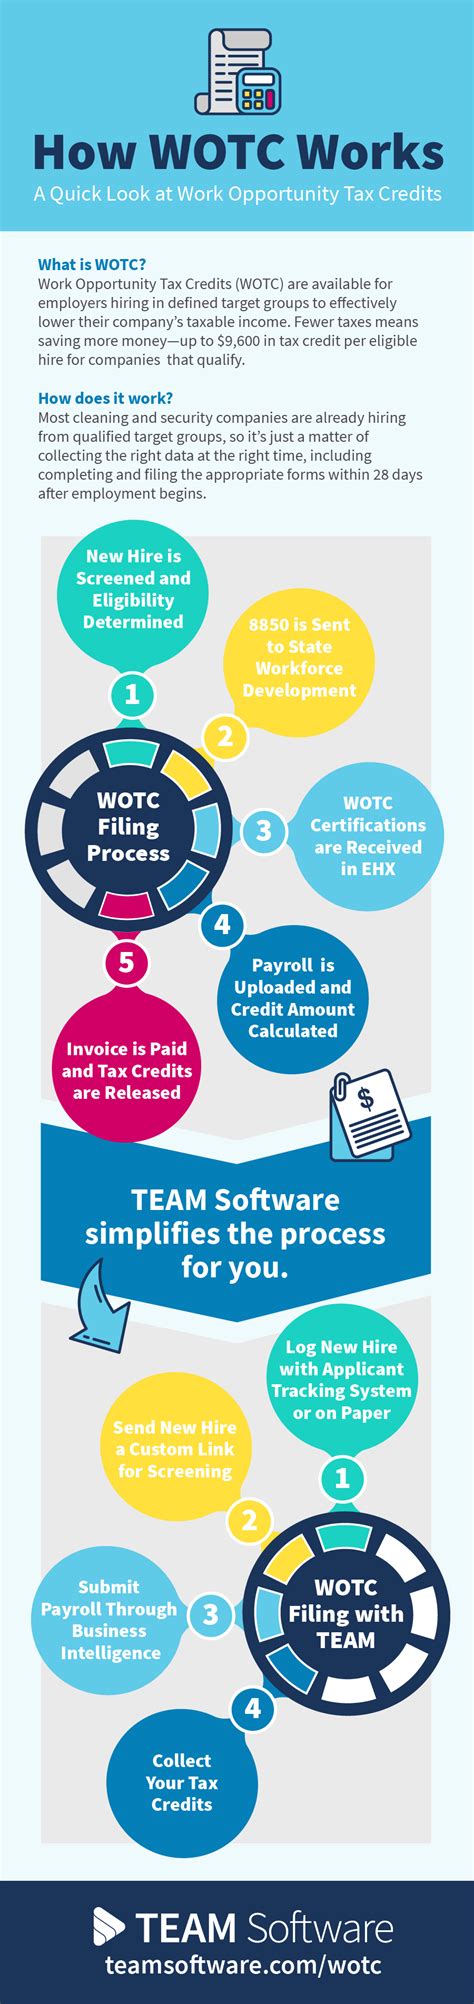 How Wotc Filing Software Makes It Easy To Calculate Your Savings And